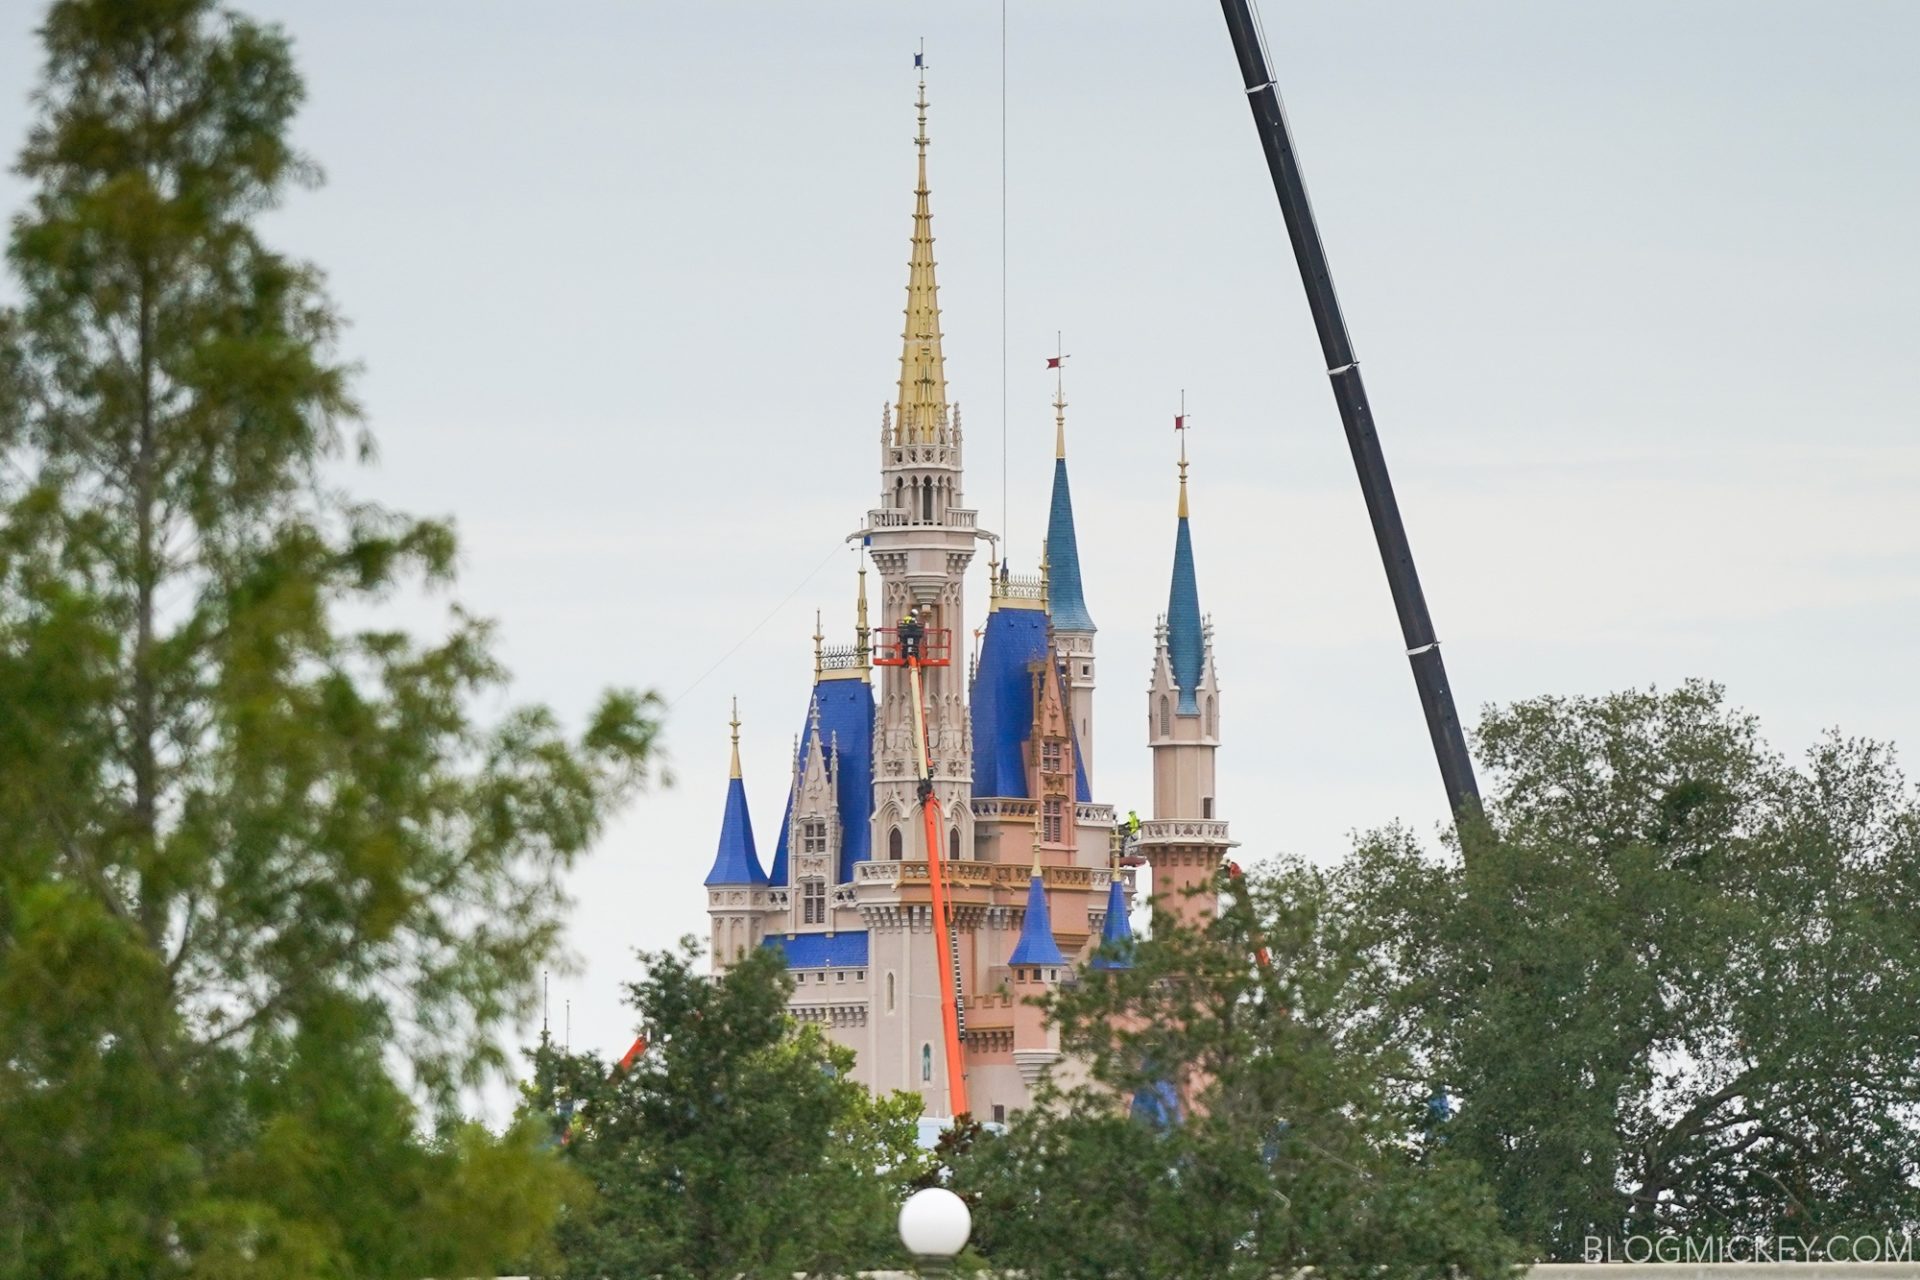 BREAKING: Theme Park Construction Projects Resume at Disney World